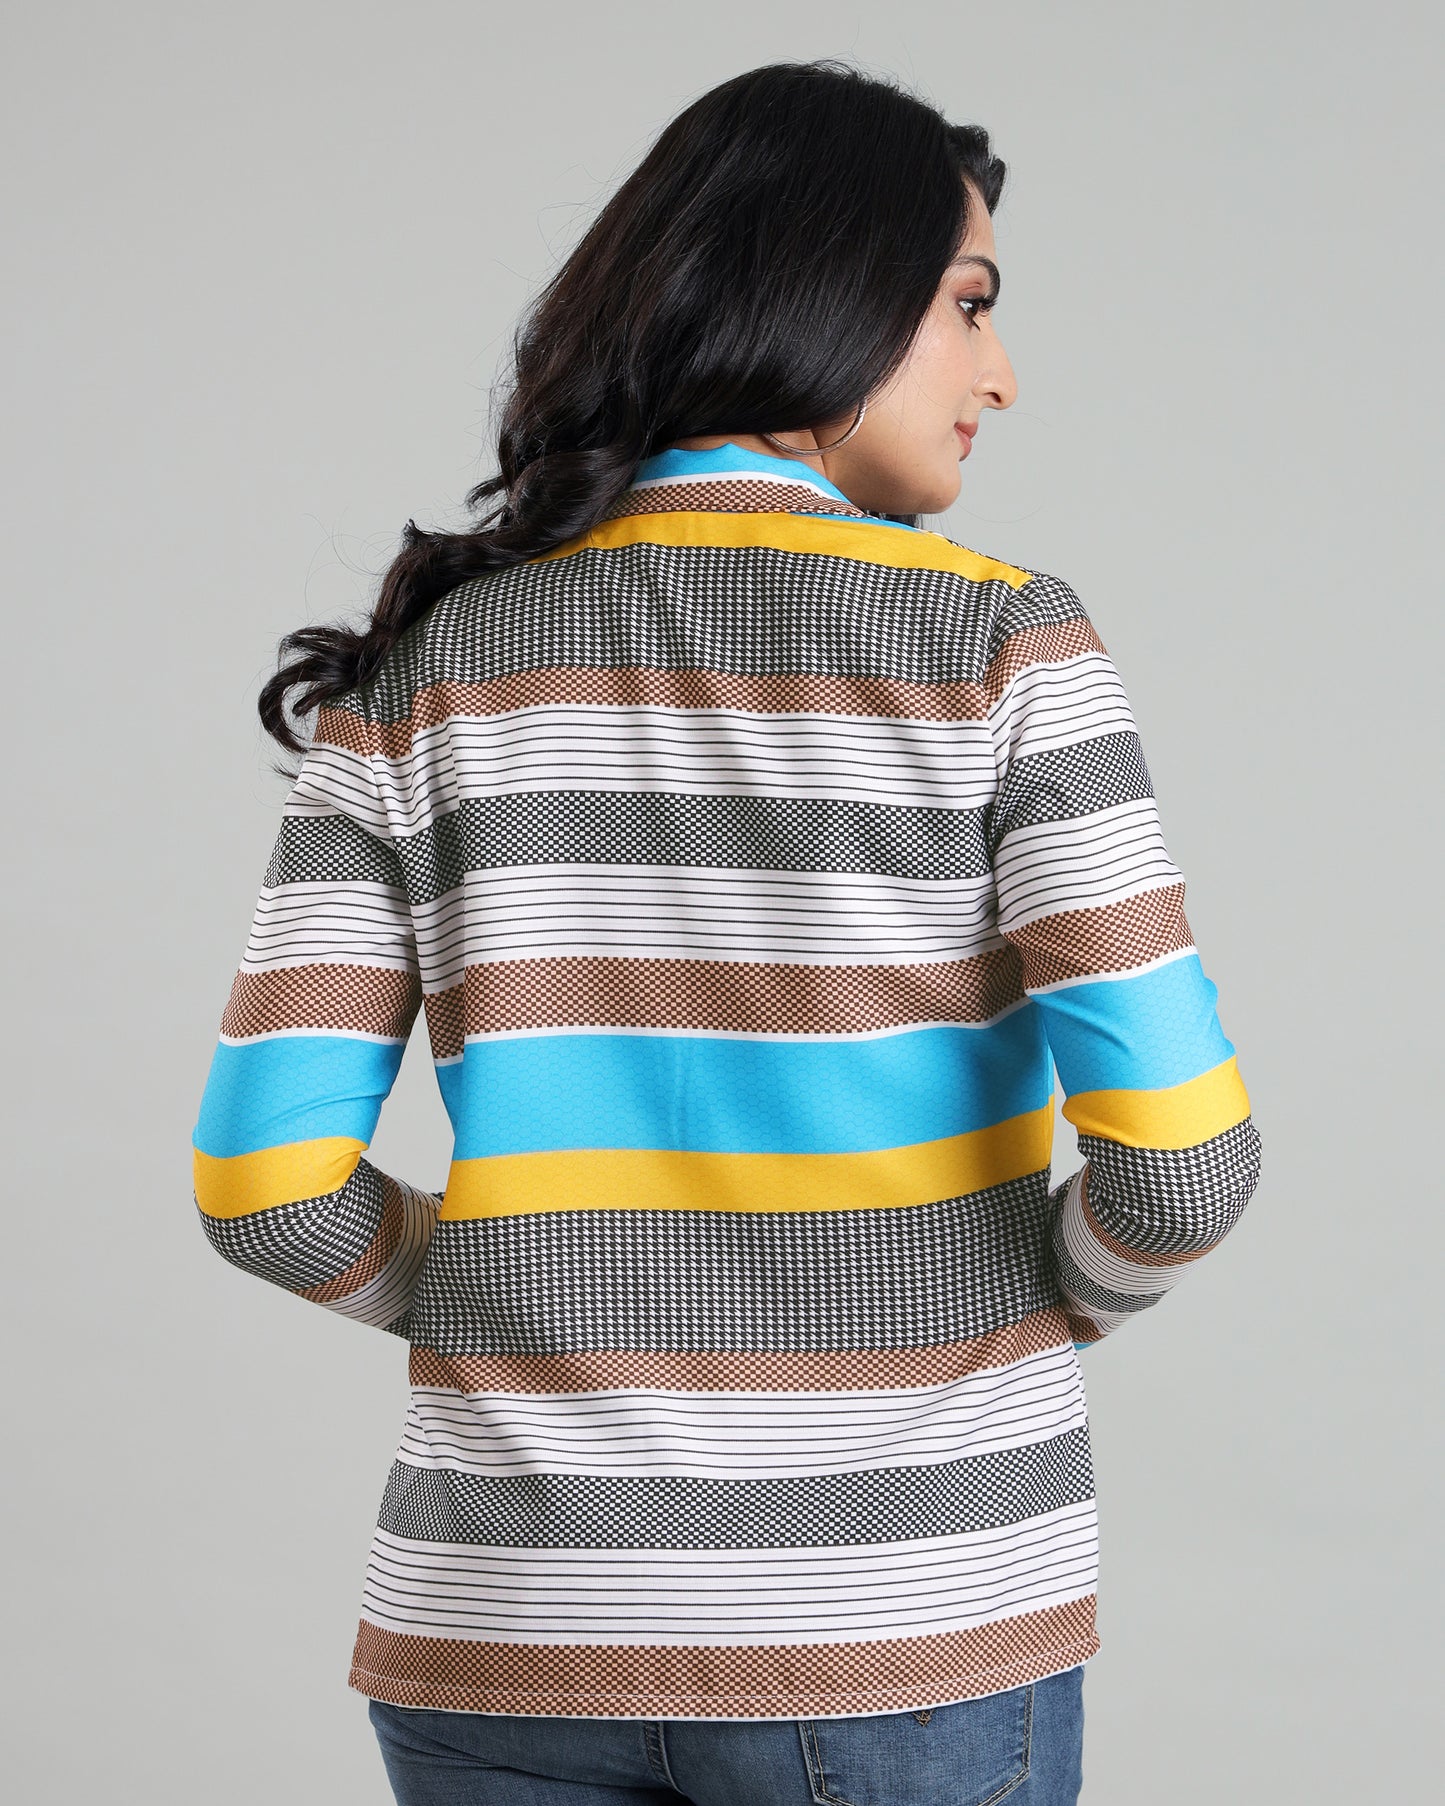 Striped And Stylish: Made-to-Order Jacket, Just for You